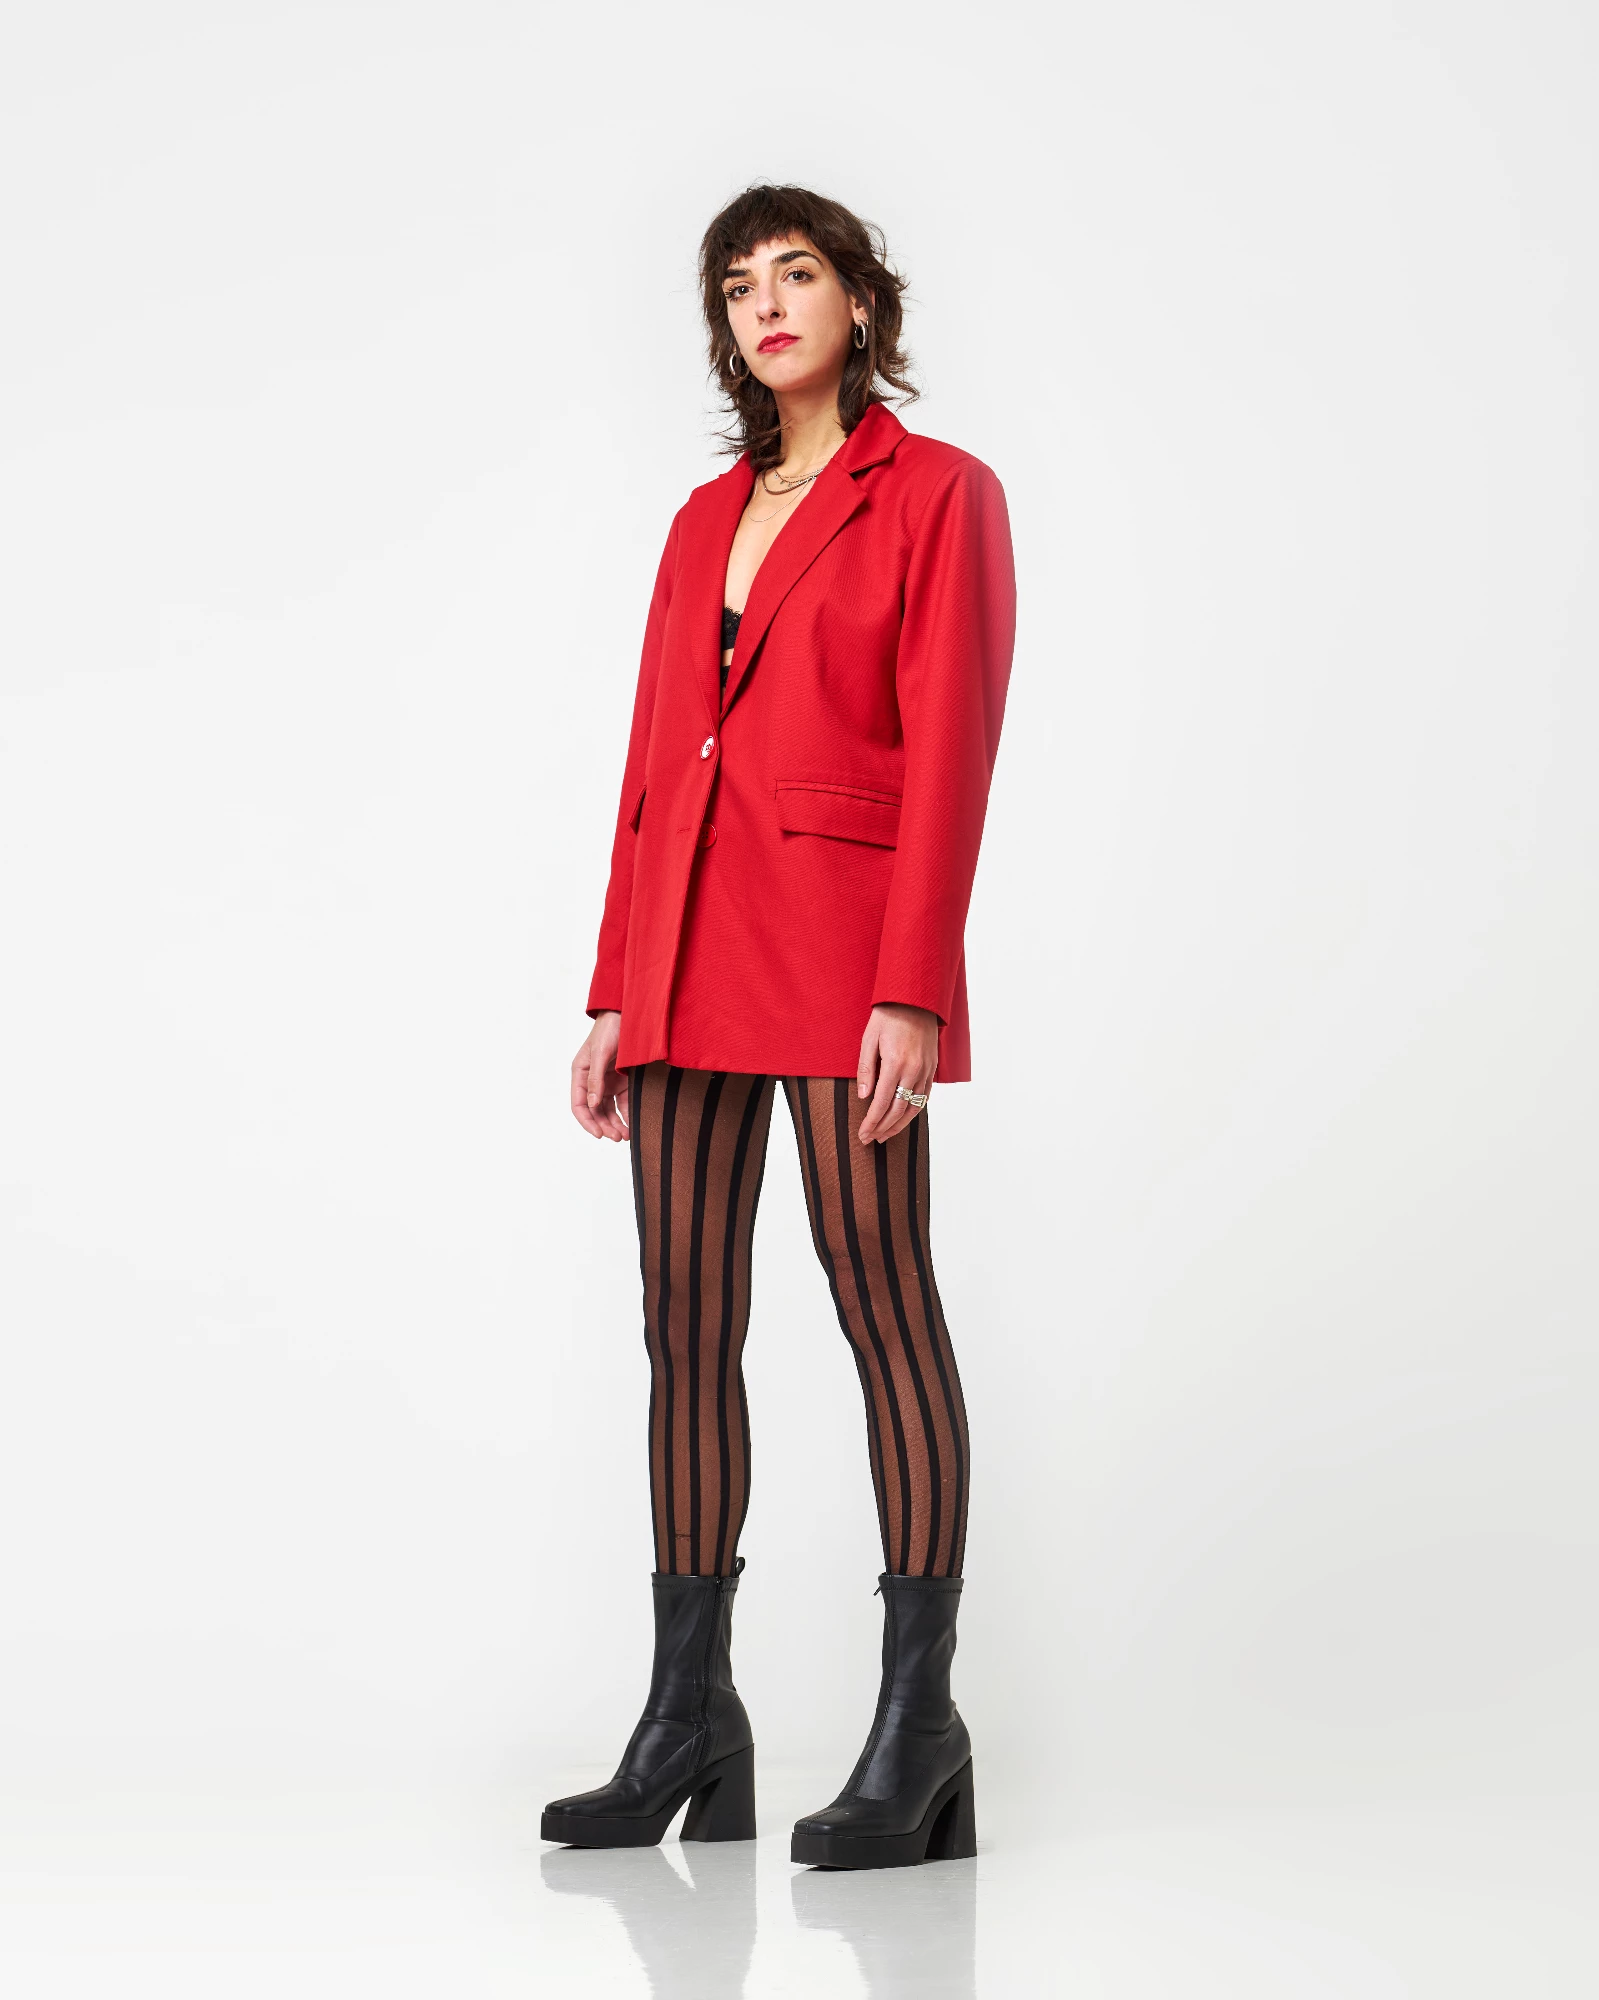 The Red Suit - The Blazer